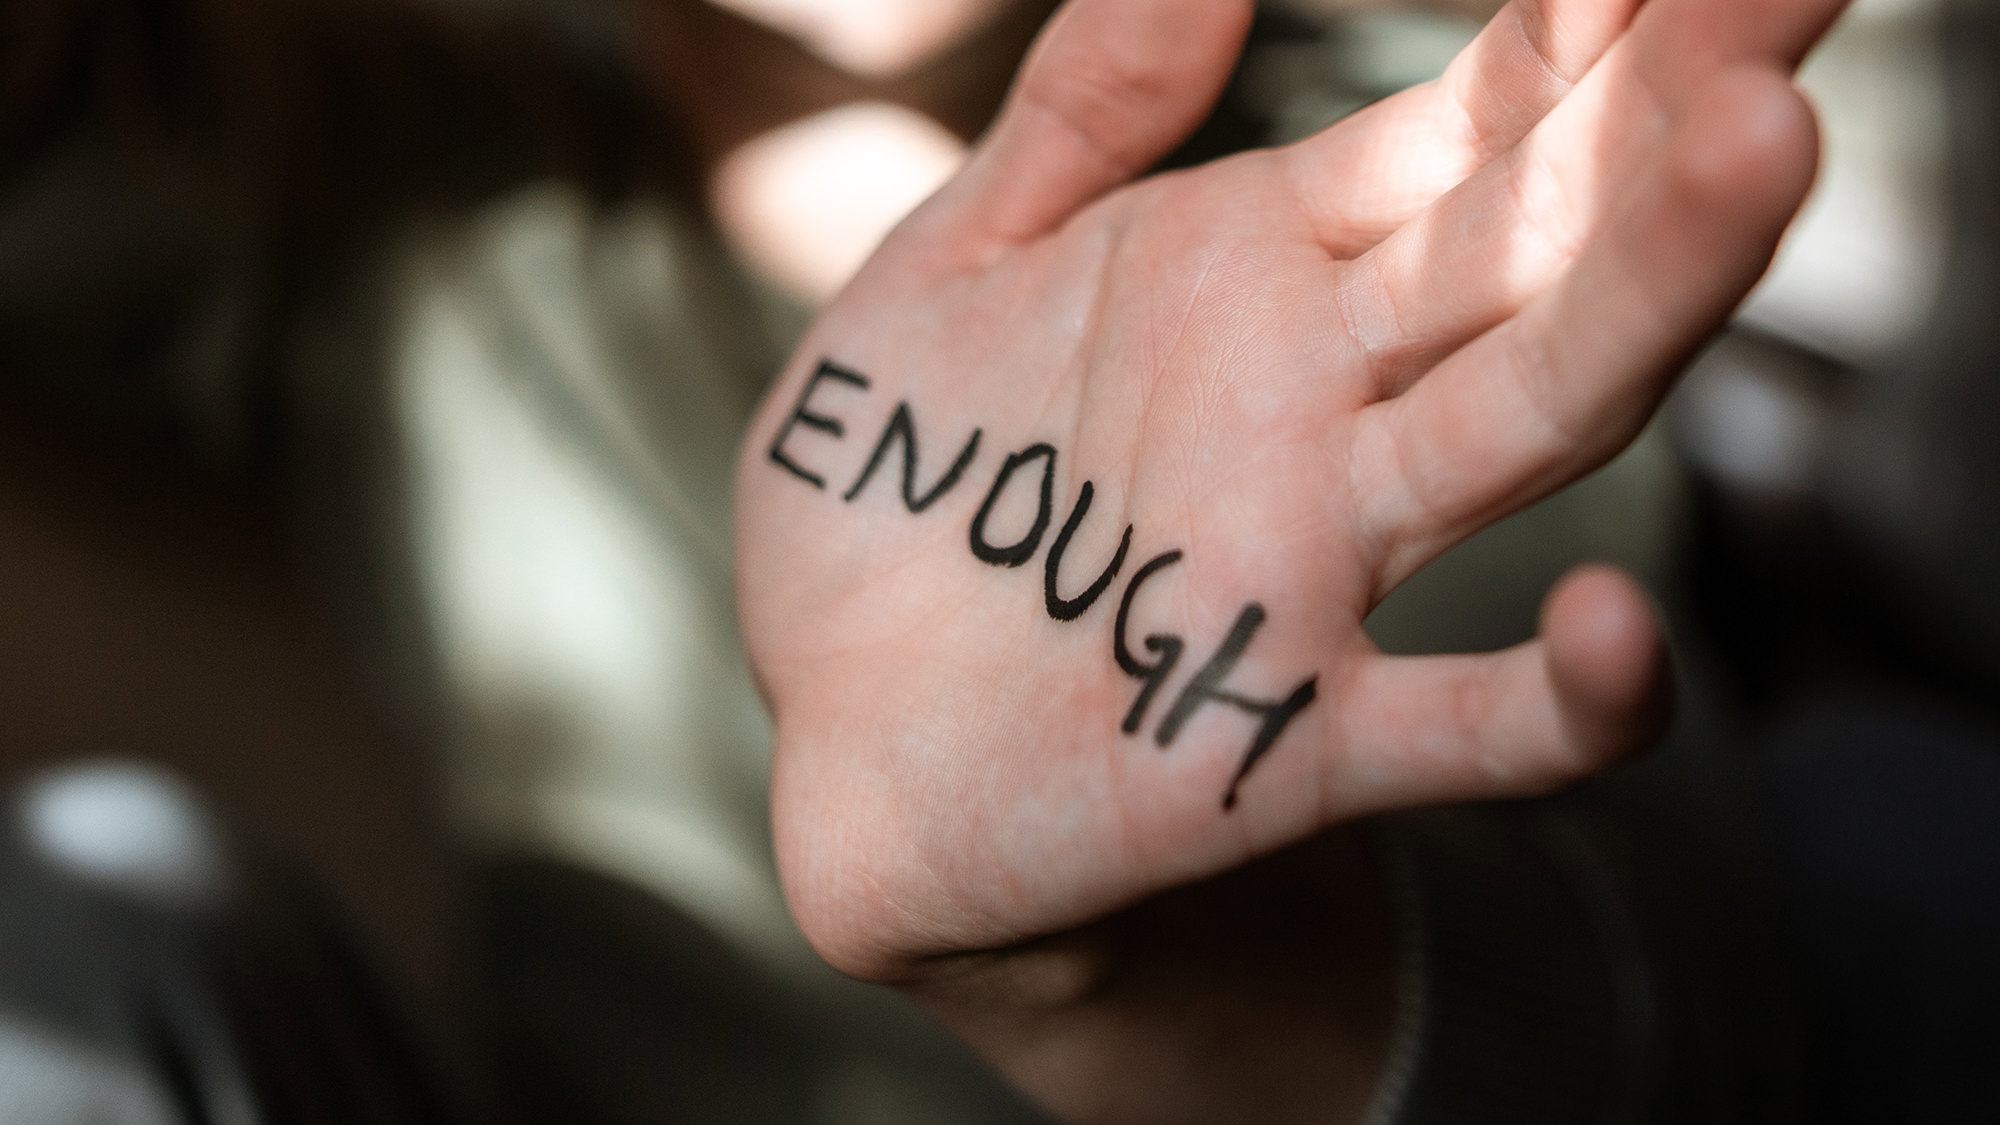 Female child's hand with "ENOUGH" written on it (for Child Sexual Abuse Awareness Month)